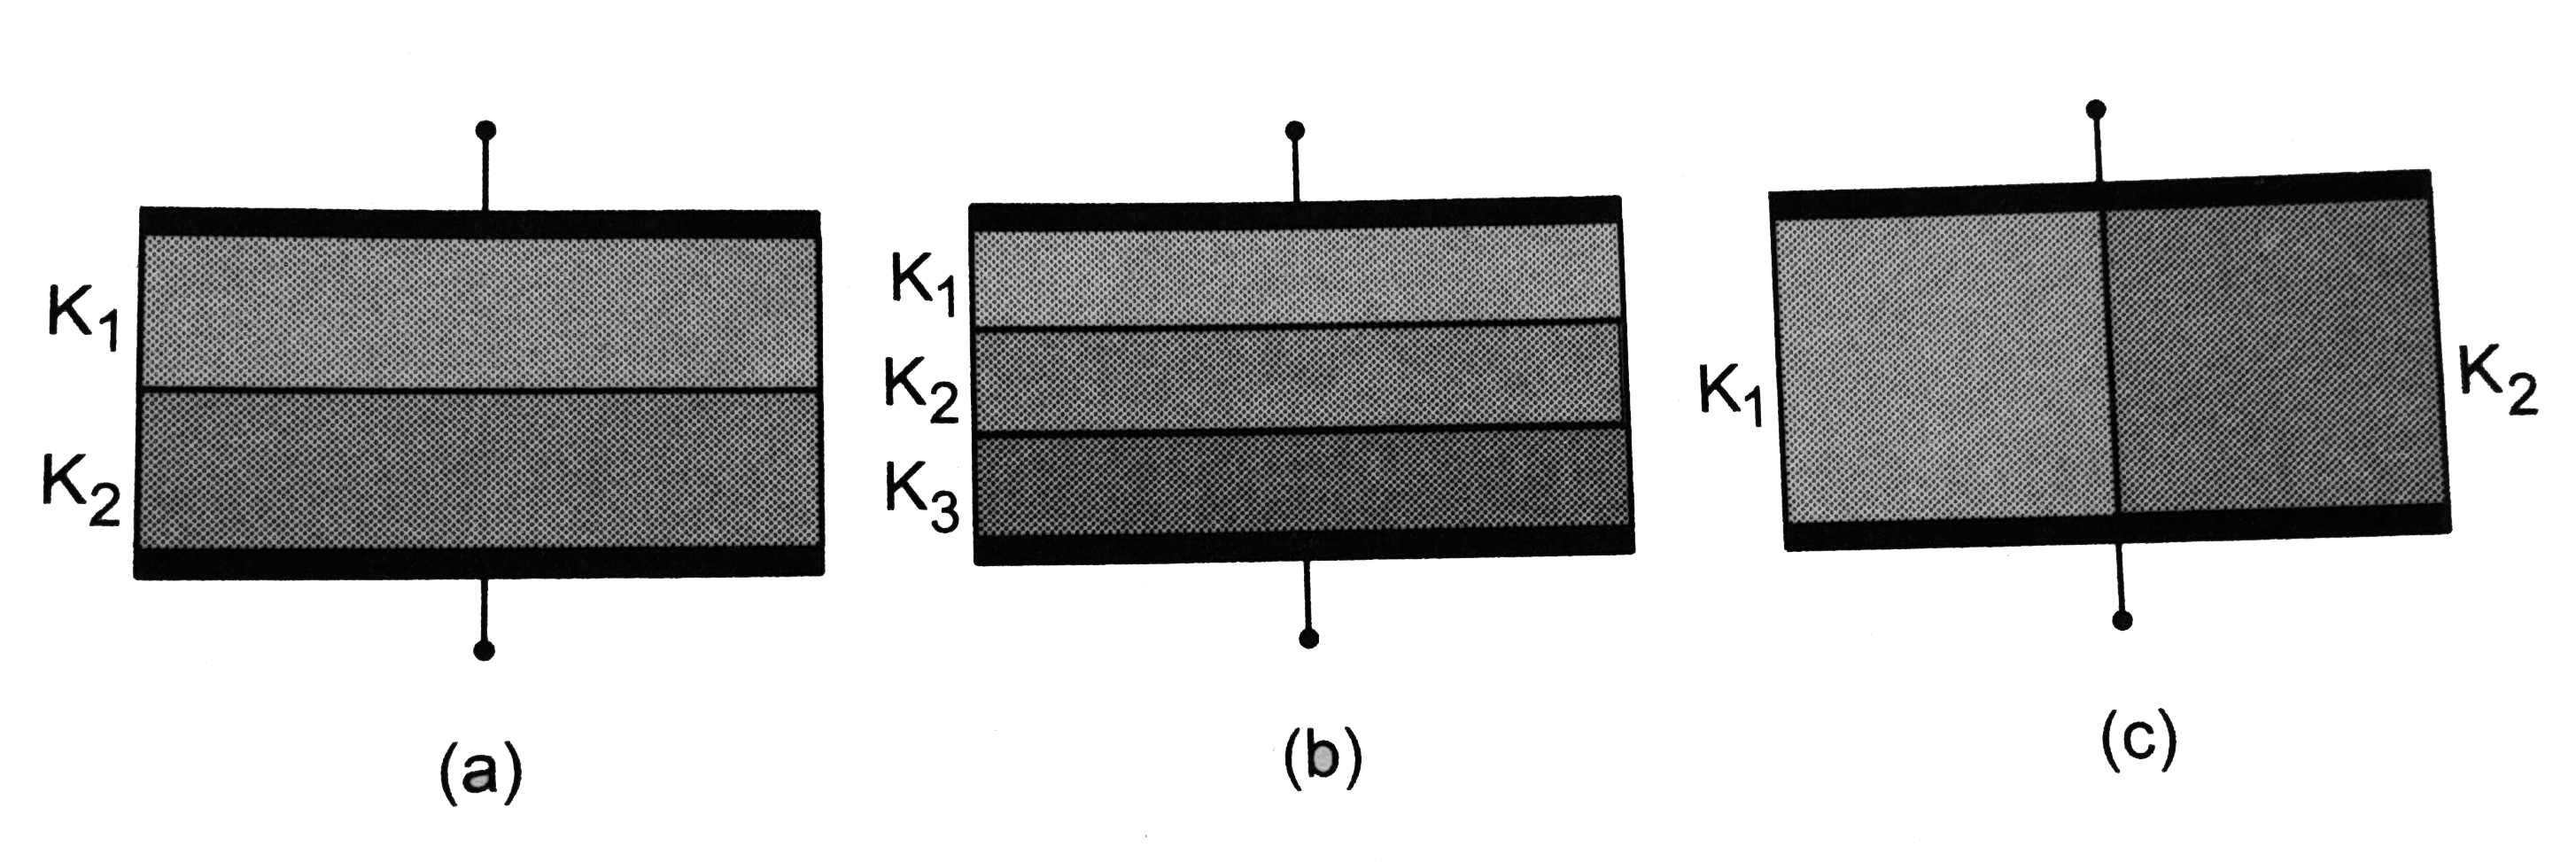 Find the capacitances of the  capacitance of the capacitors shown In figure .The plate area is Aand the separation between  the plate is d. Different dielectric slabe in a particular part of the figure area of the same thickness and the entire gap between the plate is filled with the dielectric slabs.